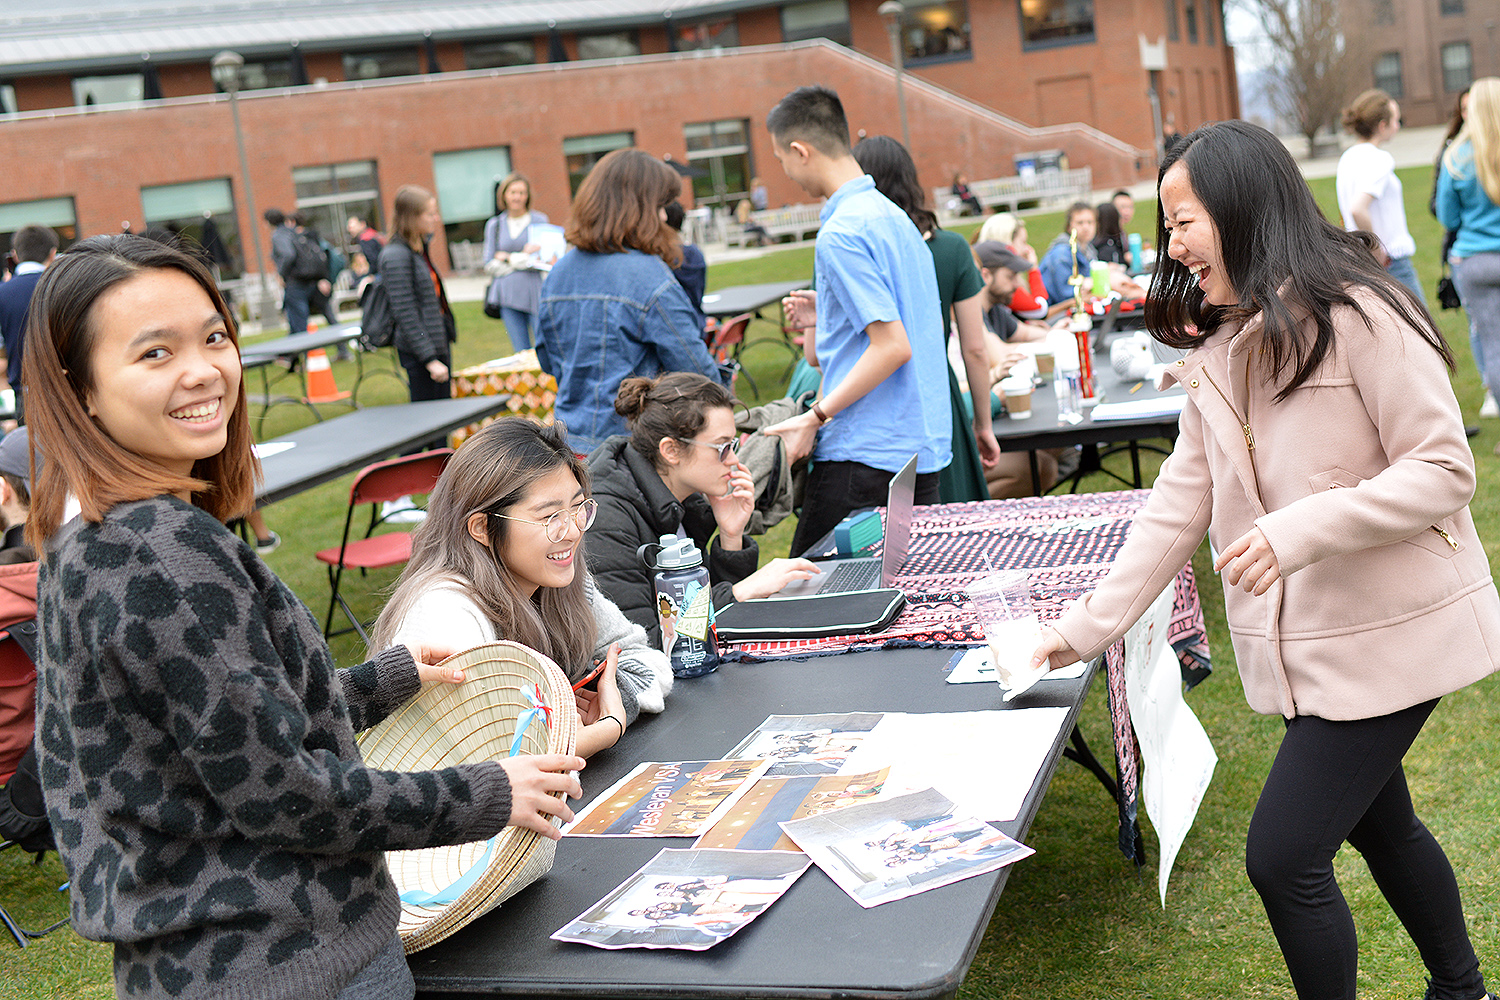 On April 13, Wesleyan students hosted a Student Activities Fair to introduce Class of 2022 admits to the many clubs and activities available on campus. 